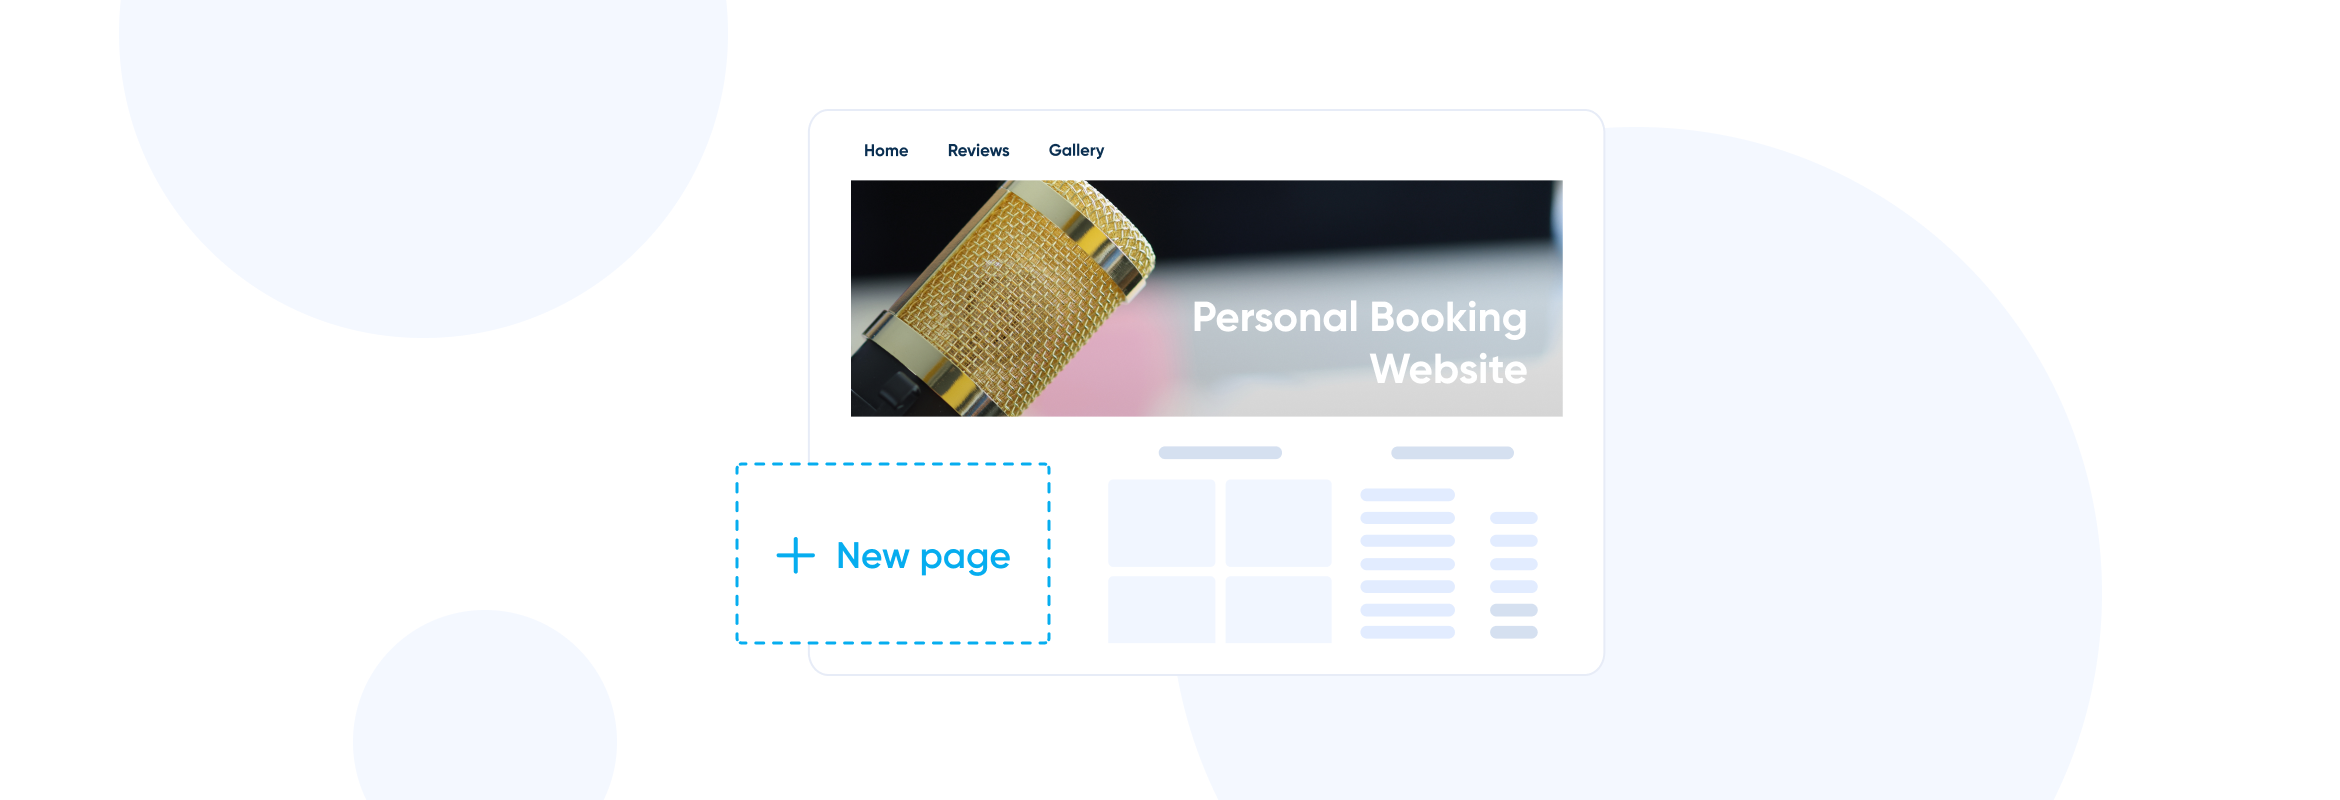 Adding Pages to your Booking Website